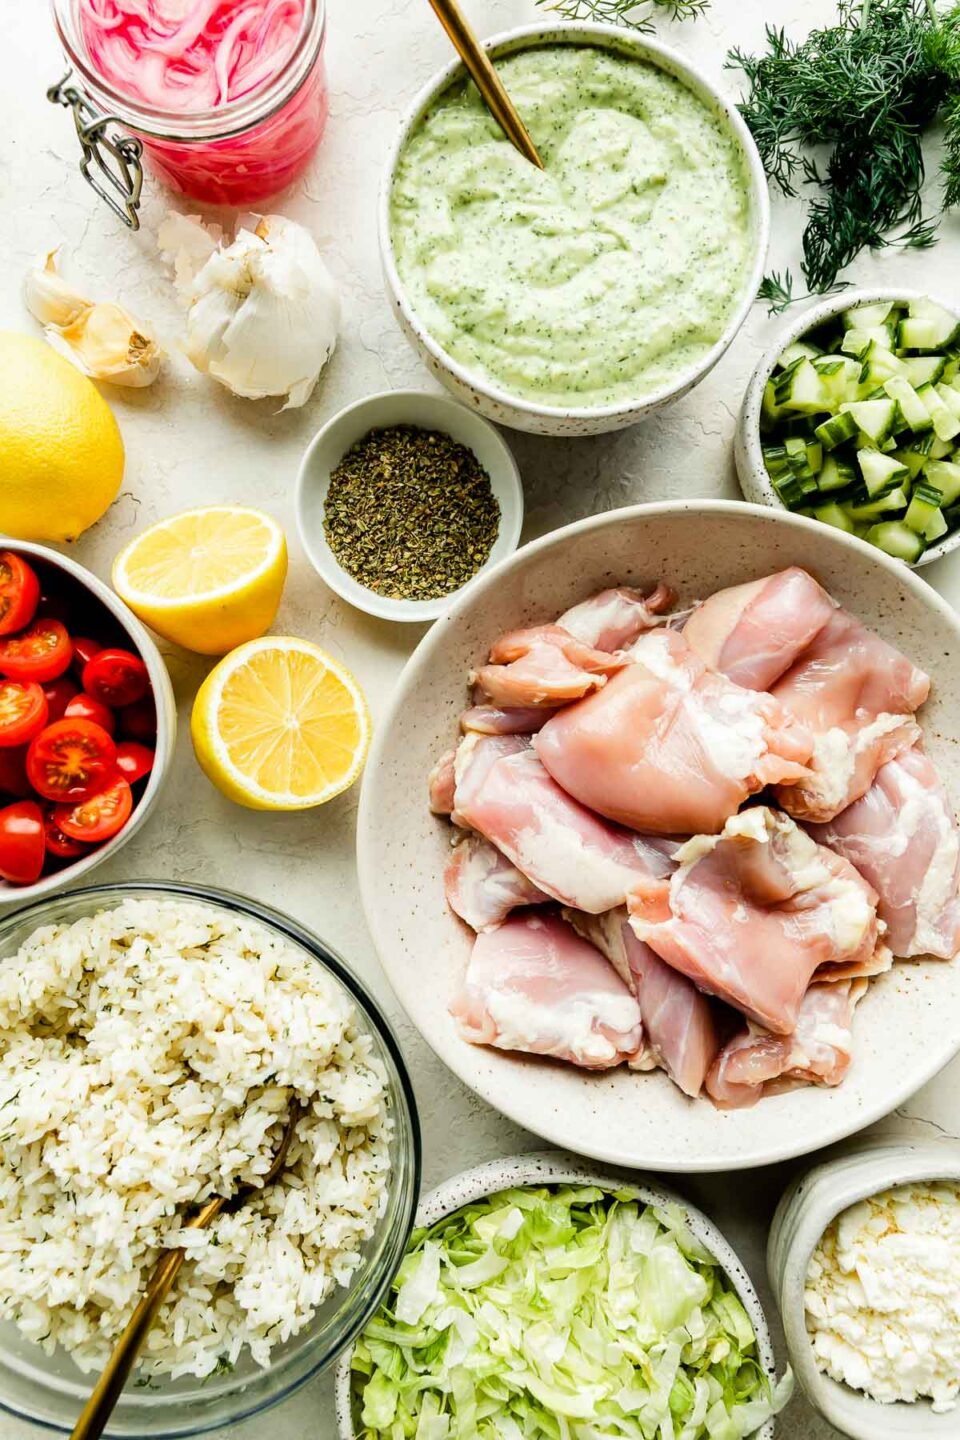 Greek chicken bowl ingredients are displayed on a white marbled surface: chicken thighs, lemons, garlic, dill, oregano, English cucumber, avocado tzatziki, tomatoes, rice, lettuce, feta, & pickled onions.